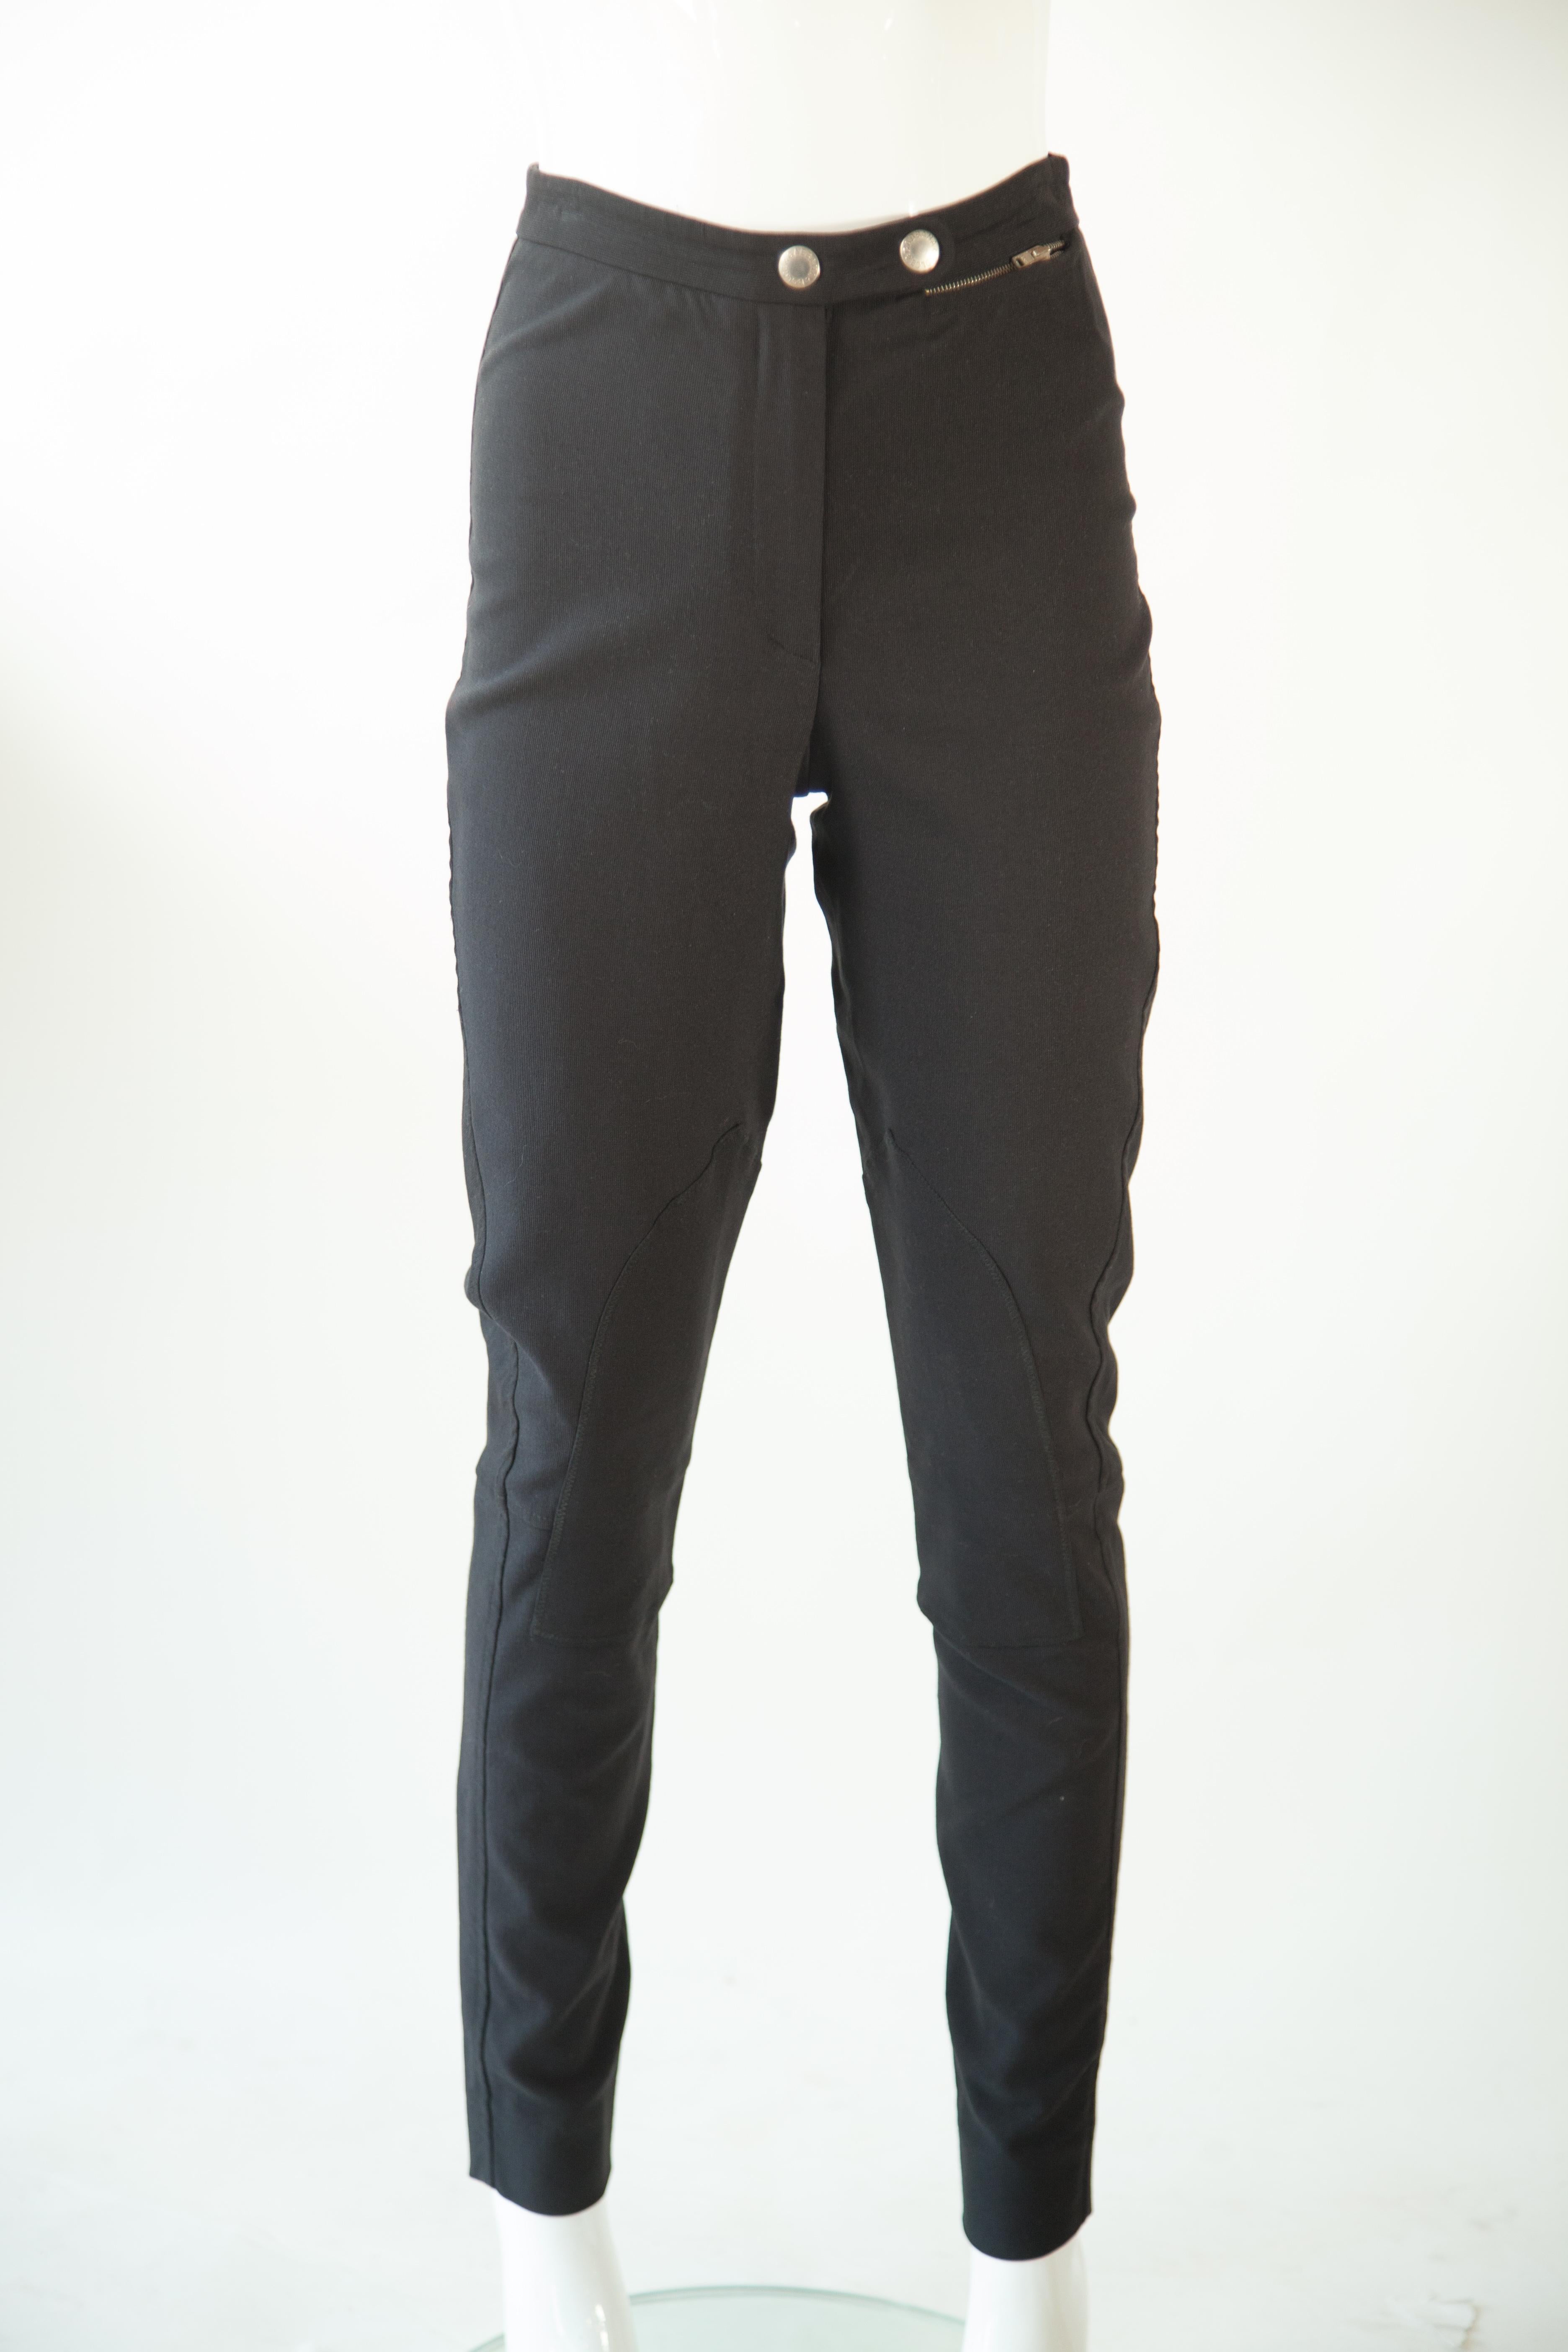 This stylish and high-performance Dolce & Gabbana Equestrian Pant is crafted with a lightweight, stretch-woven fabric that provides superior breathability and mobility. The tight-fitting silhouette lends an elegant look, while the high-waisted